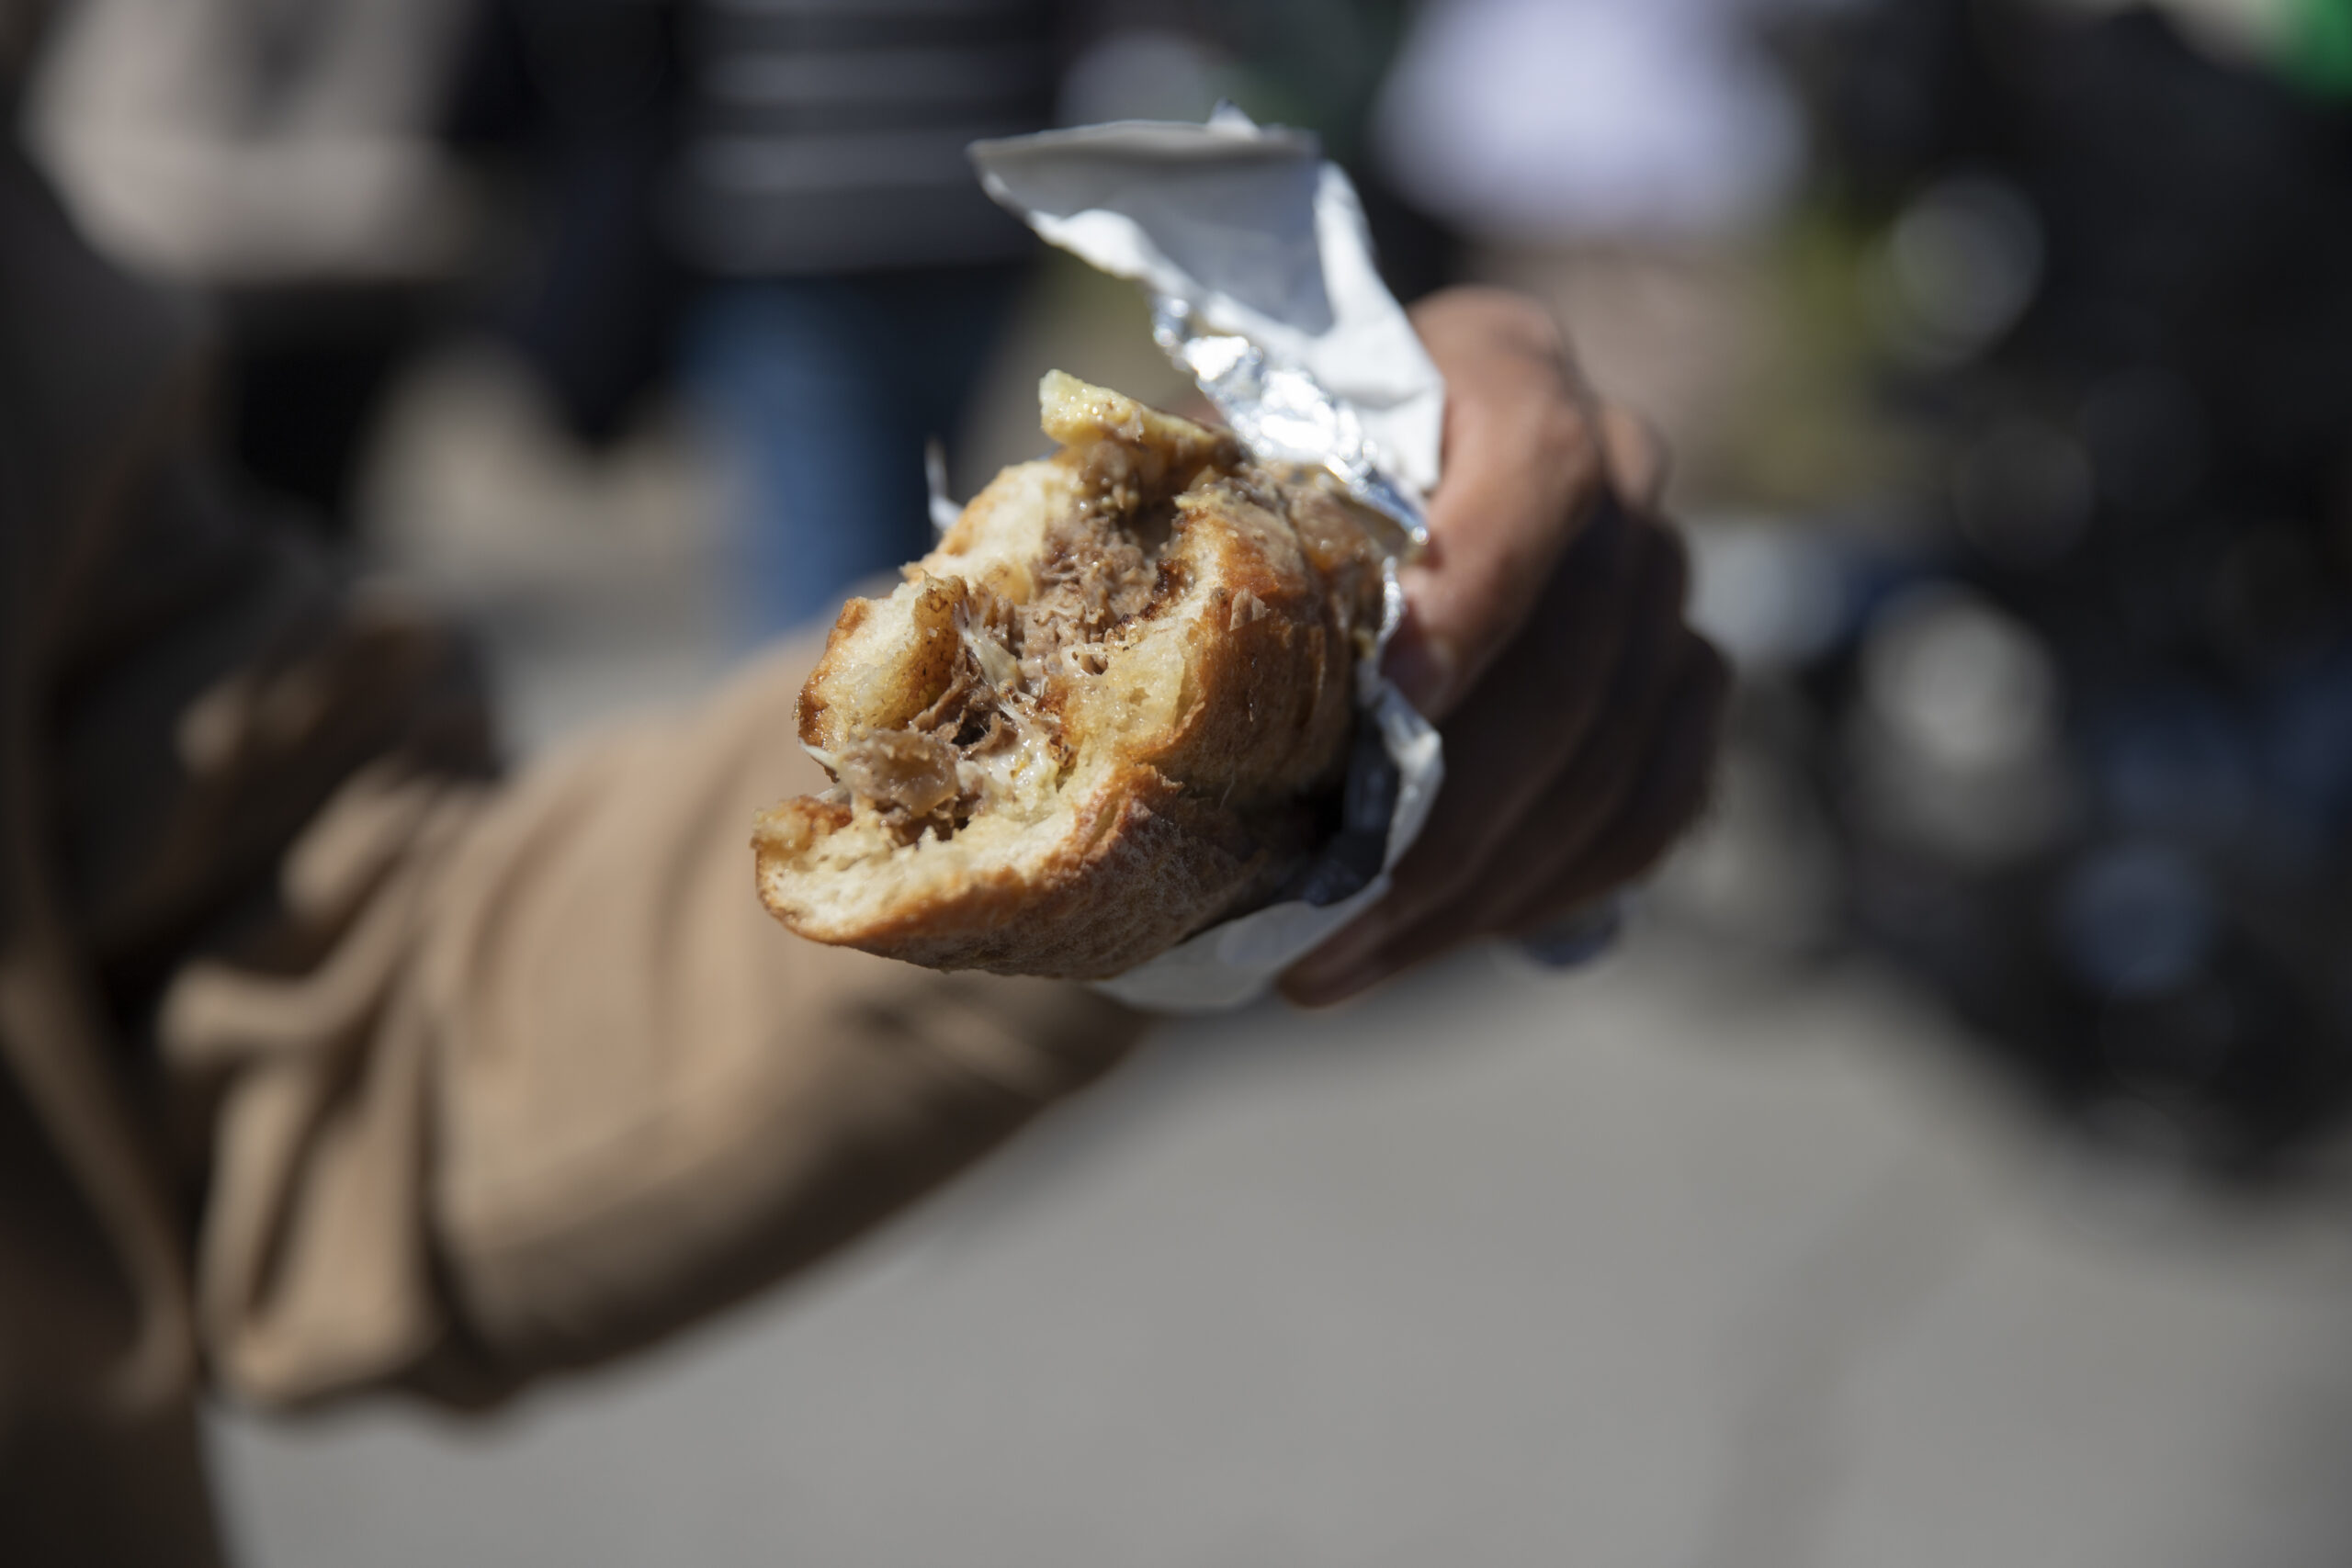 A cheese steak from Raclette Street at Prospect Park Smorgasburg.